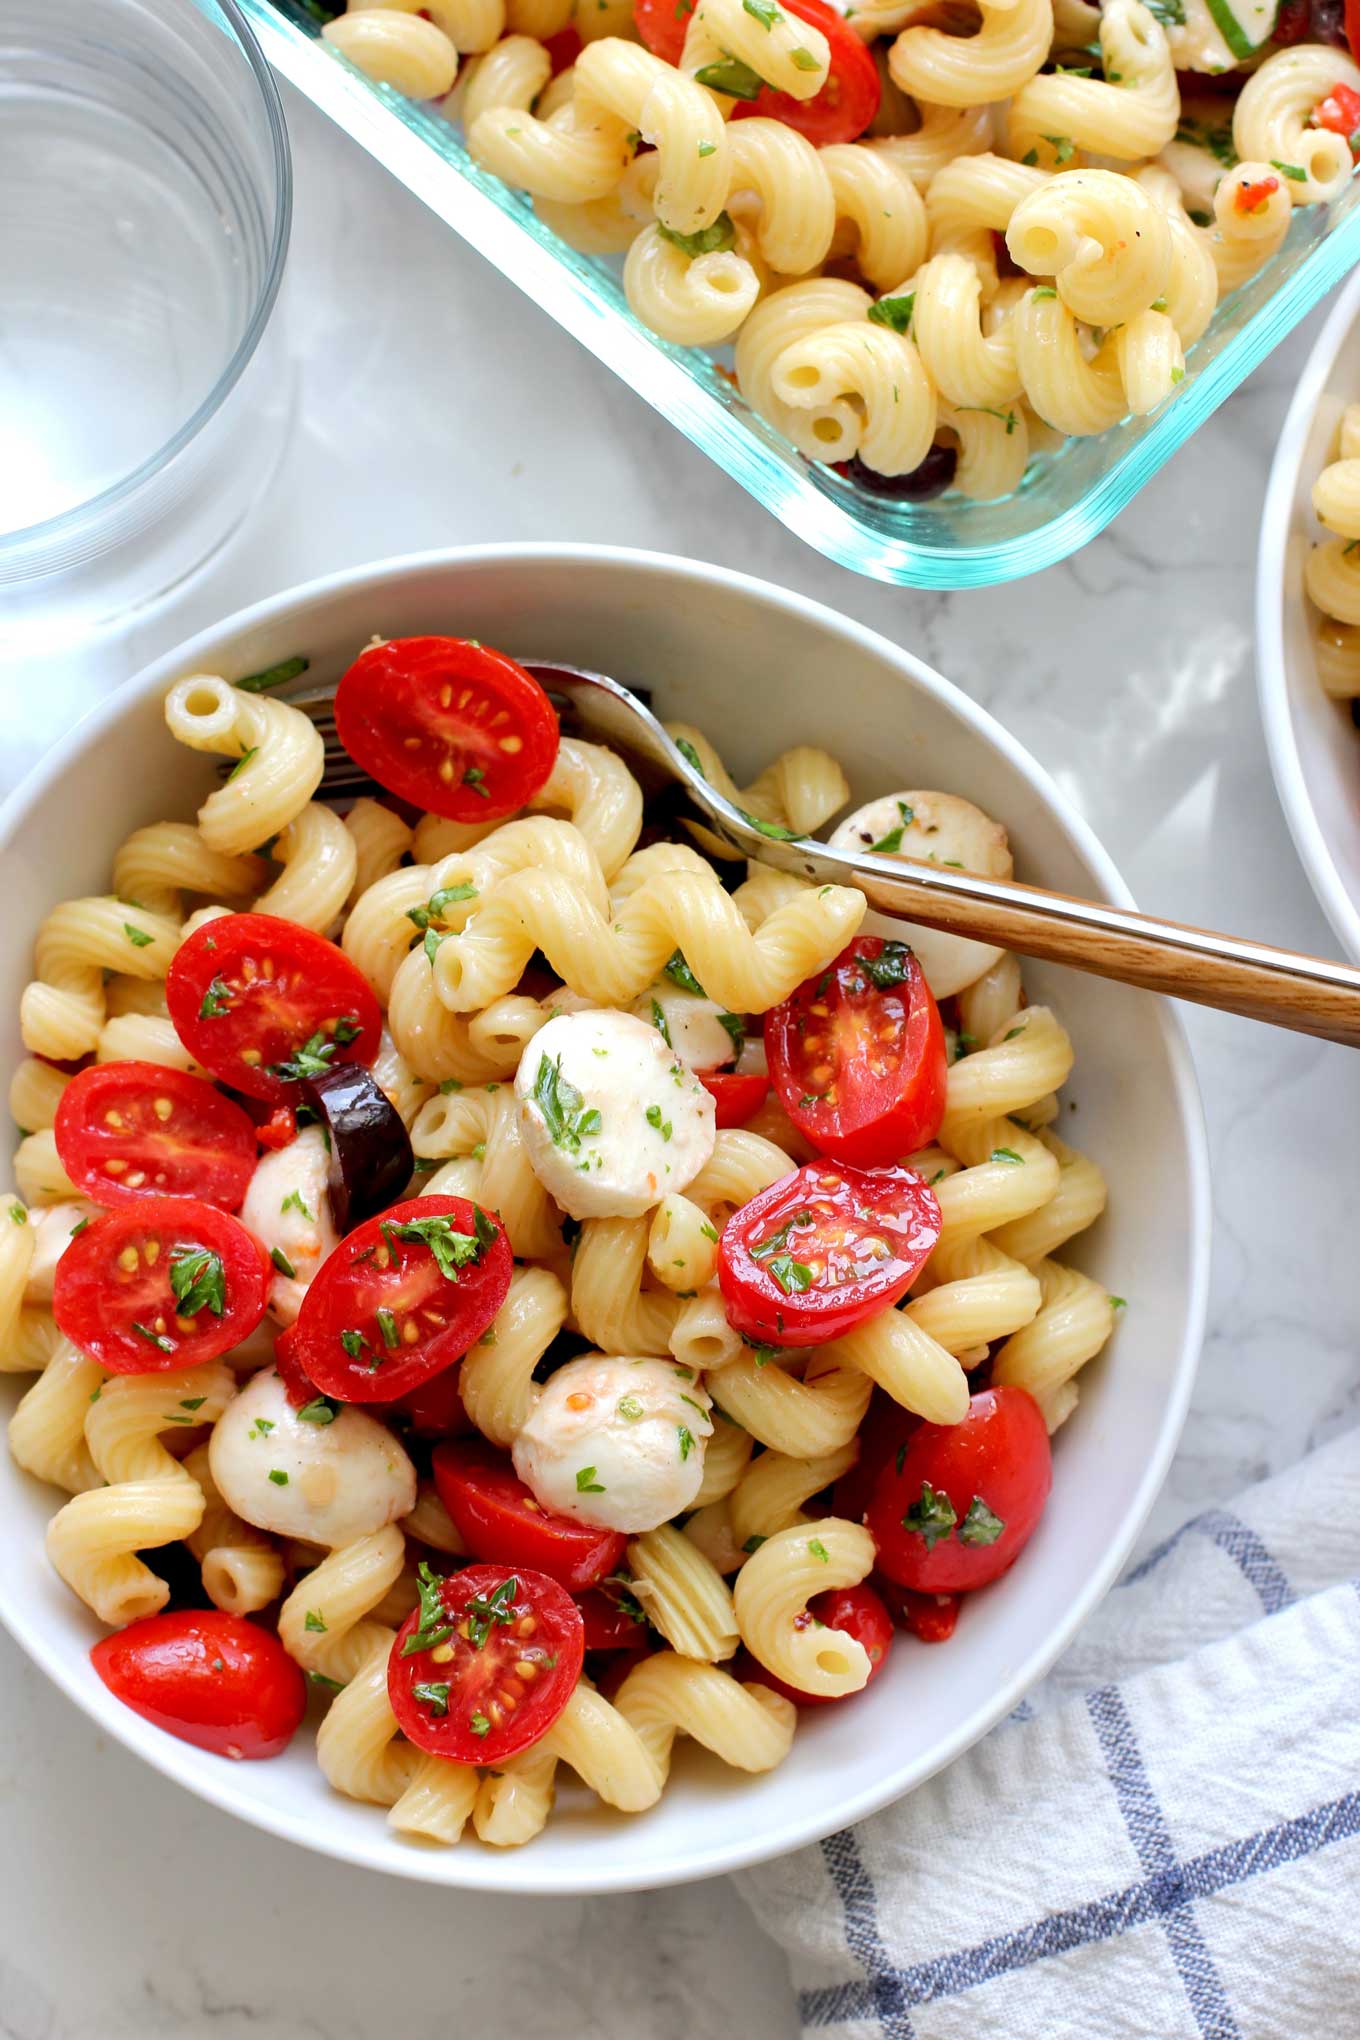 Close up view of white bowl with pasta salad and a fork.